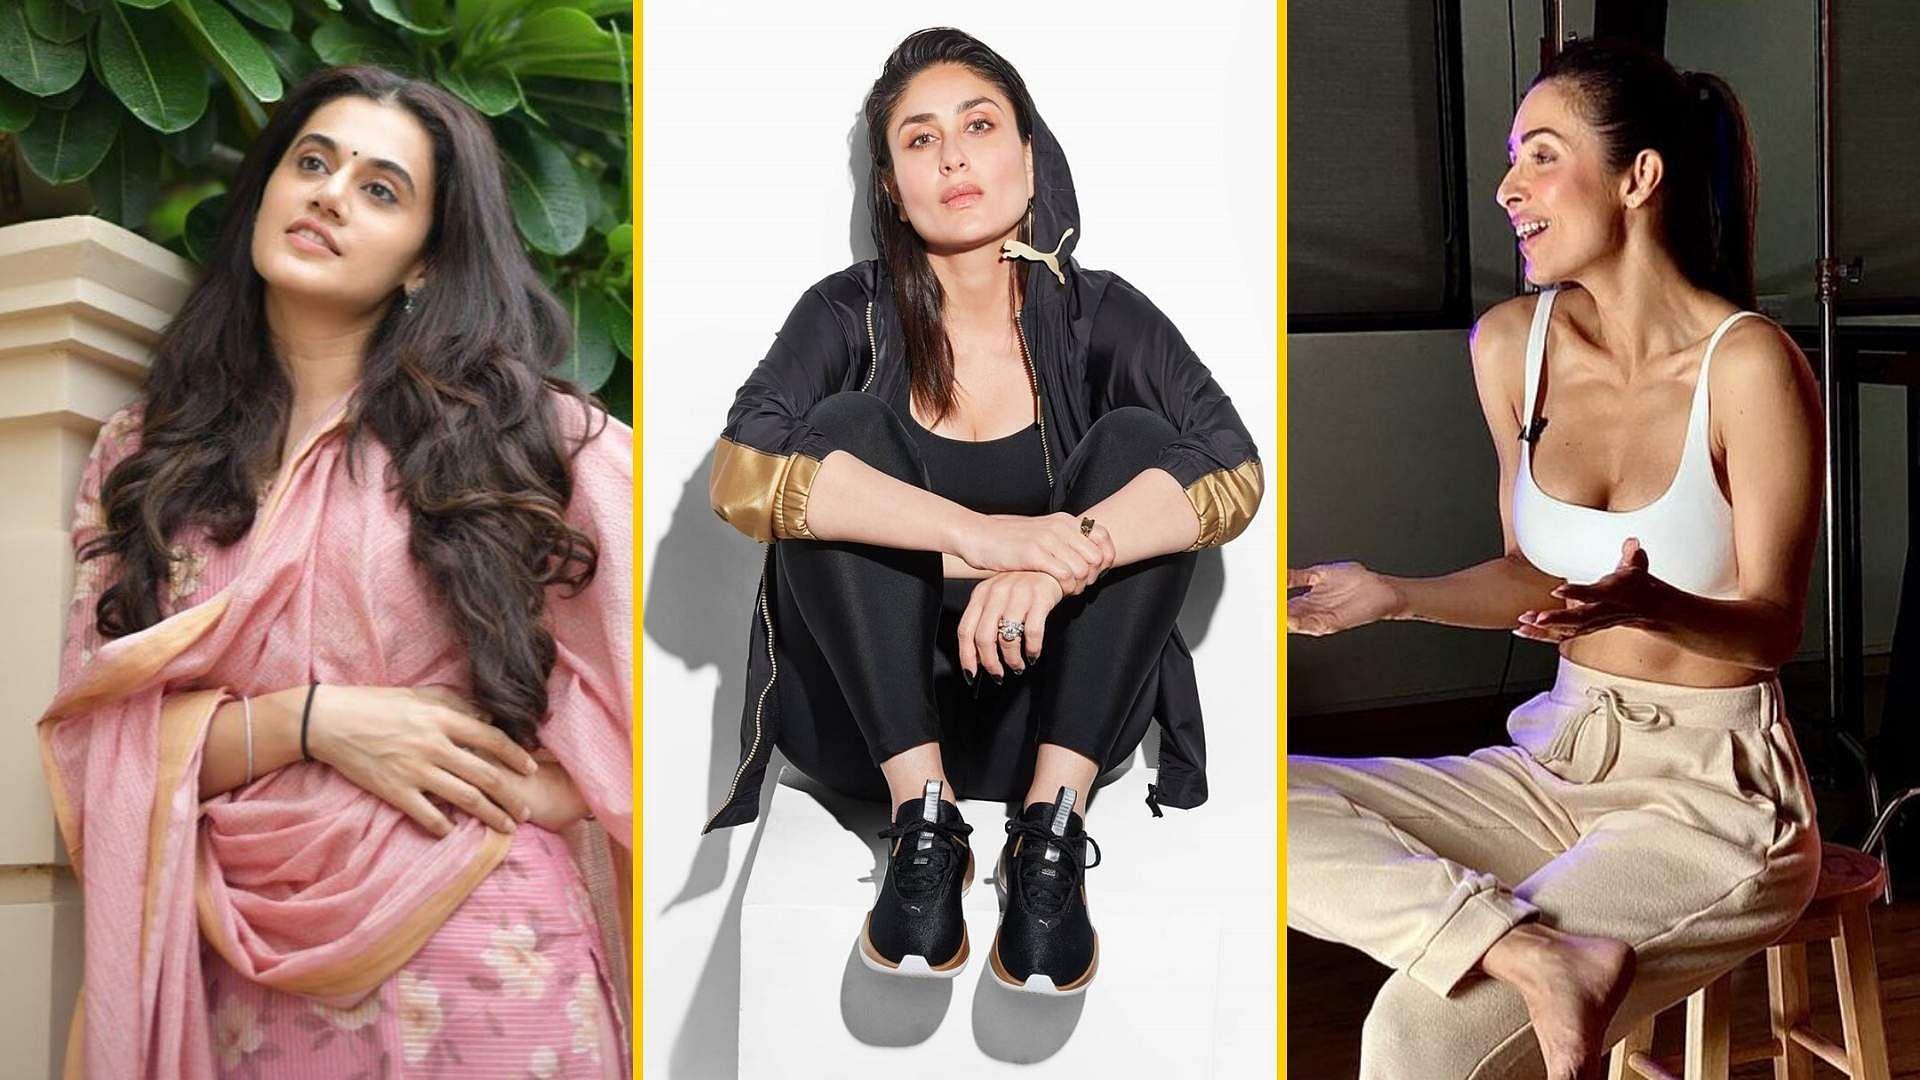 Taapsee Pannu, Kareena Kapoor and other celebs shared Women’s Day wishes on social media.